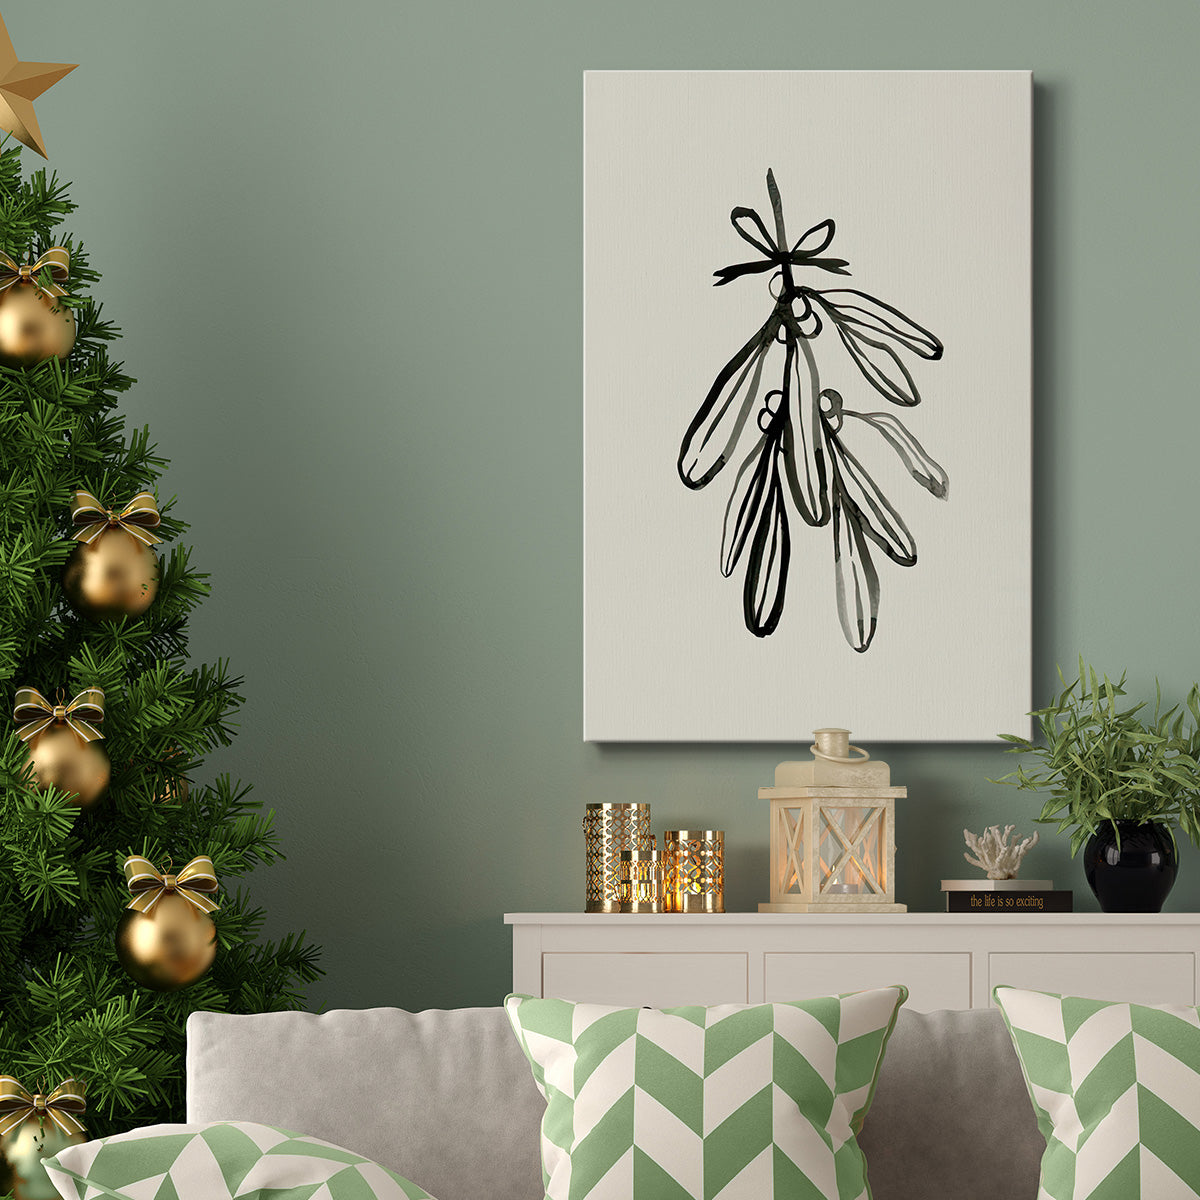 Mistletoe Sketch with Bows I - Gallery Wrapped Canvas